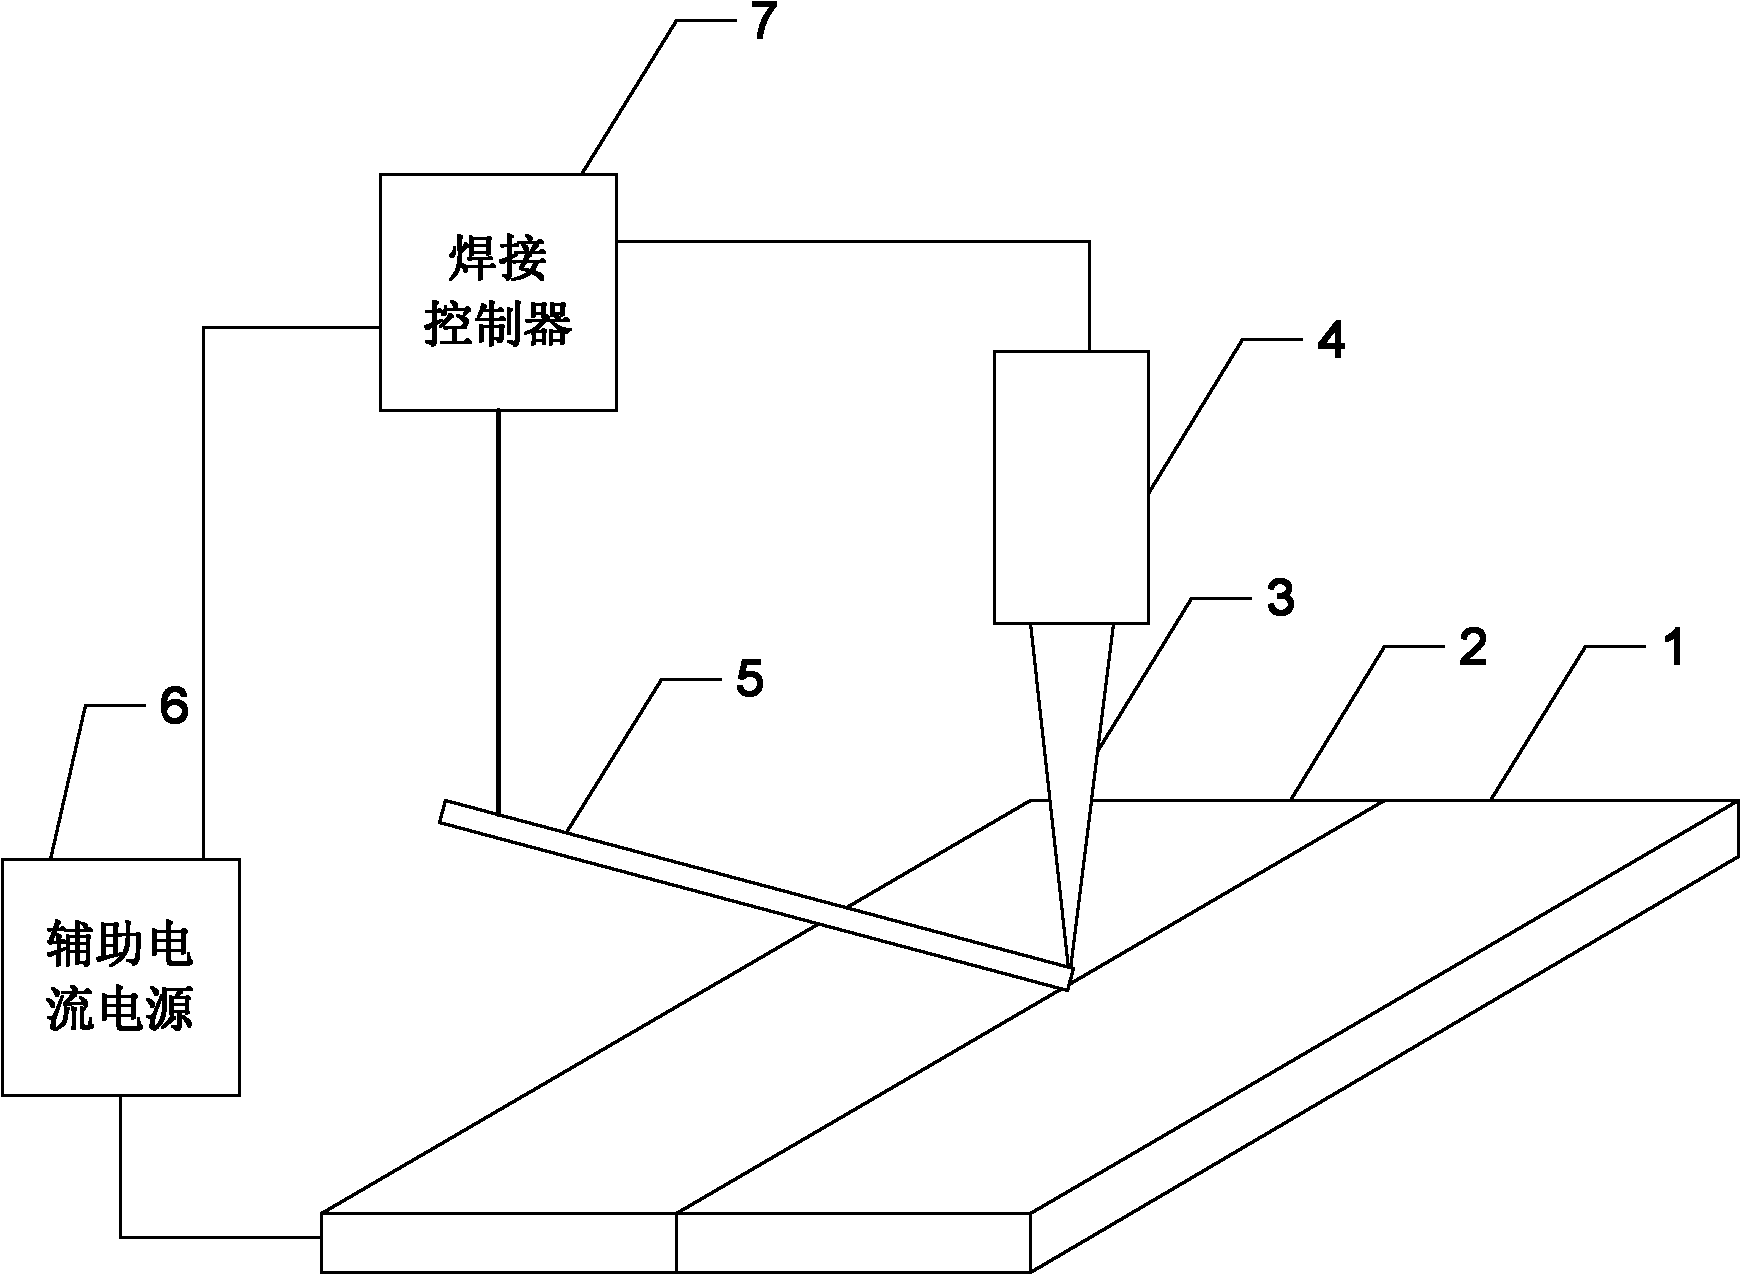 Current-assisted laser brazing method or laser fusion brazing method